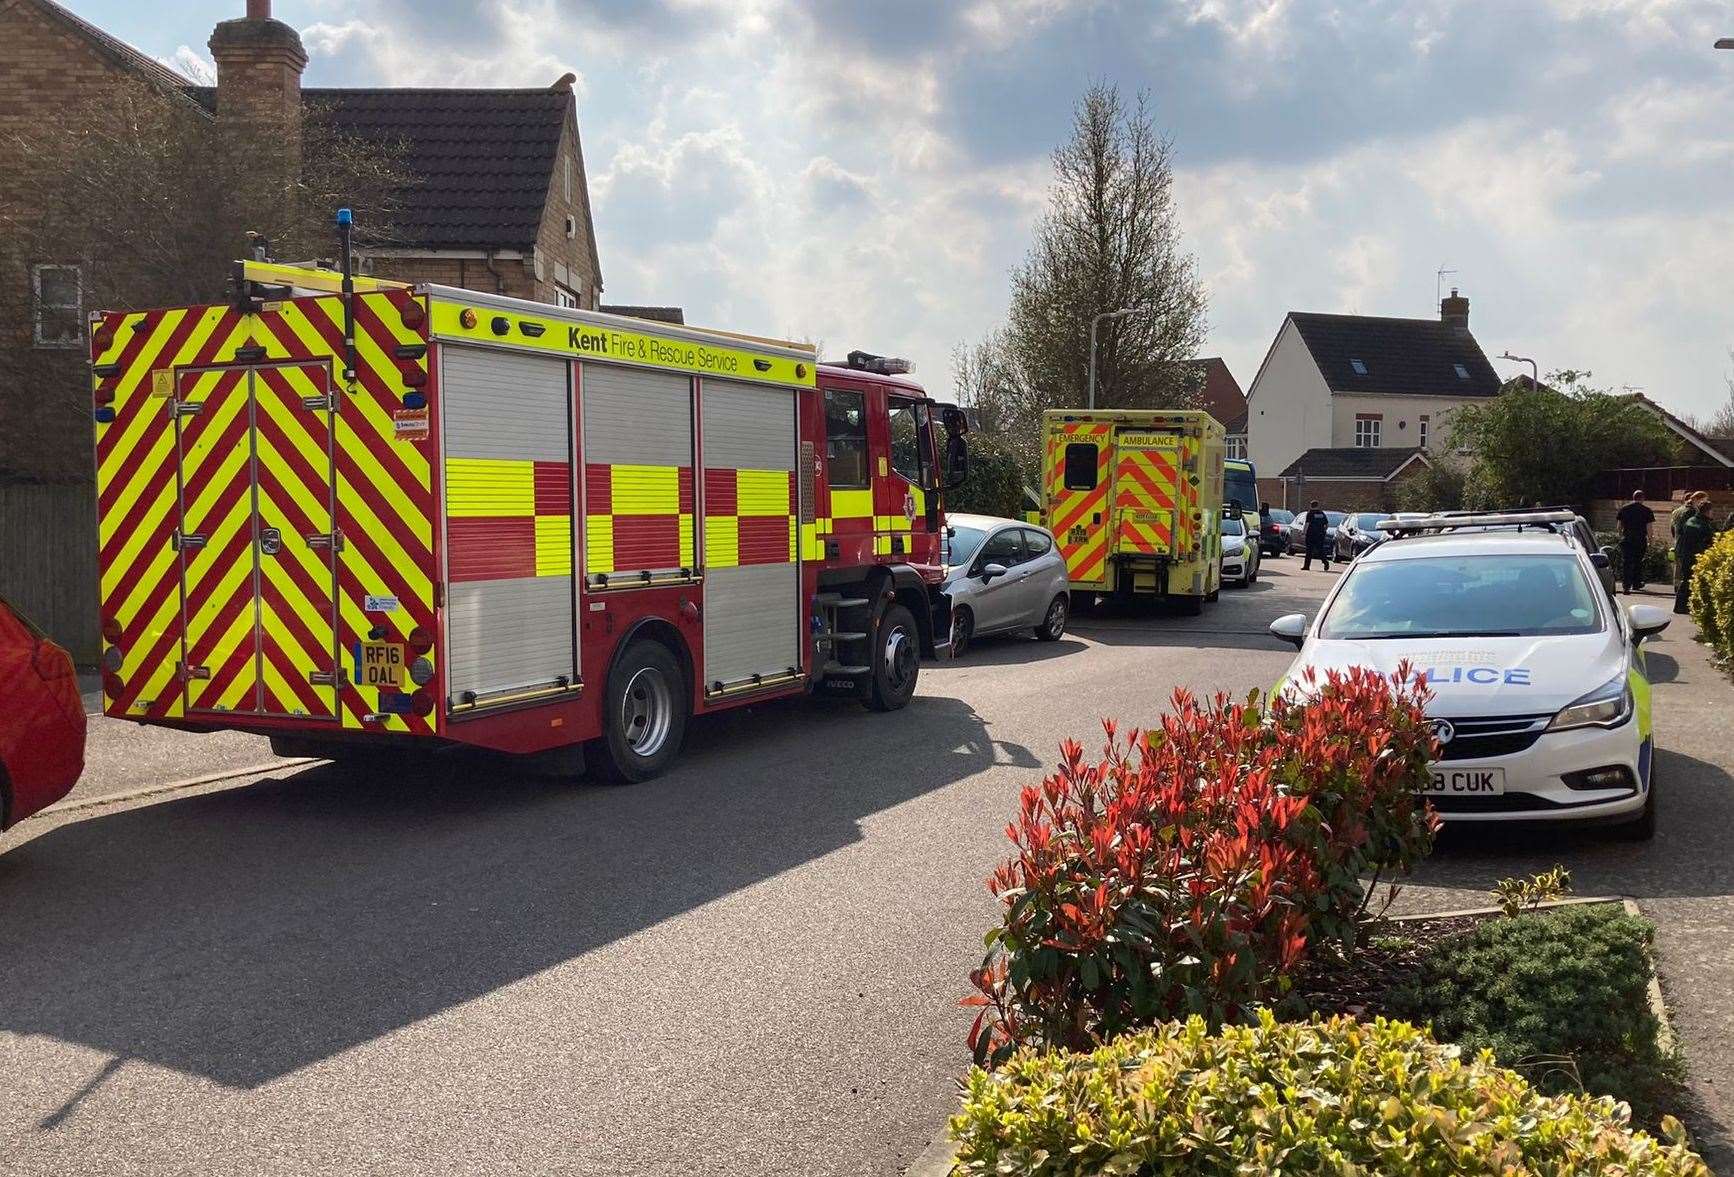 Some of the emergency vehicles in Amber Rise, off Sunstone Drive, in Sittingbourne